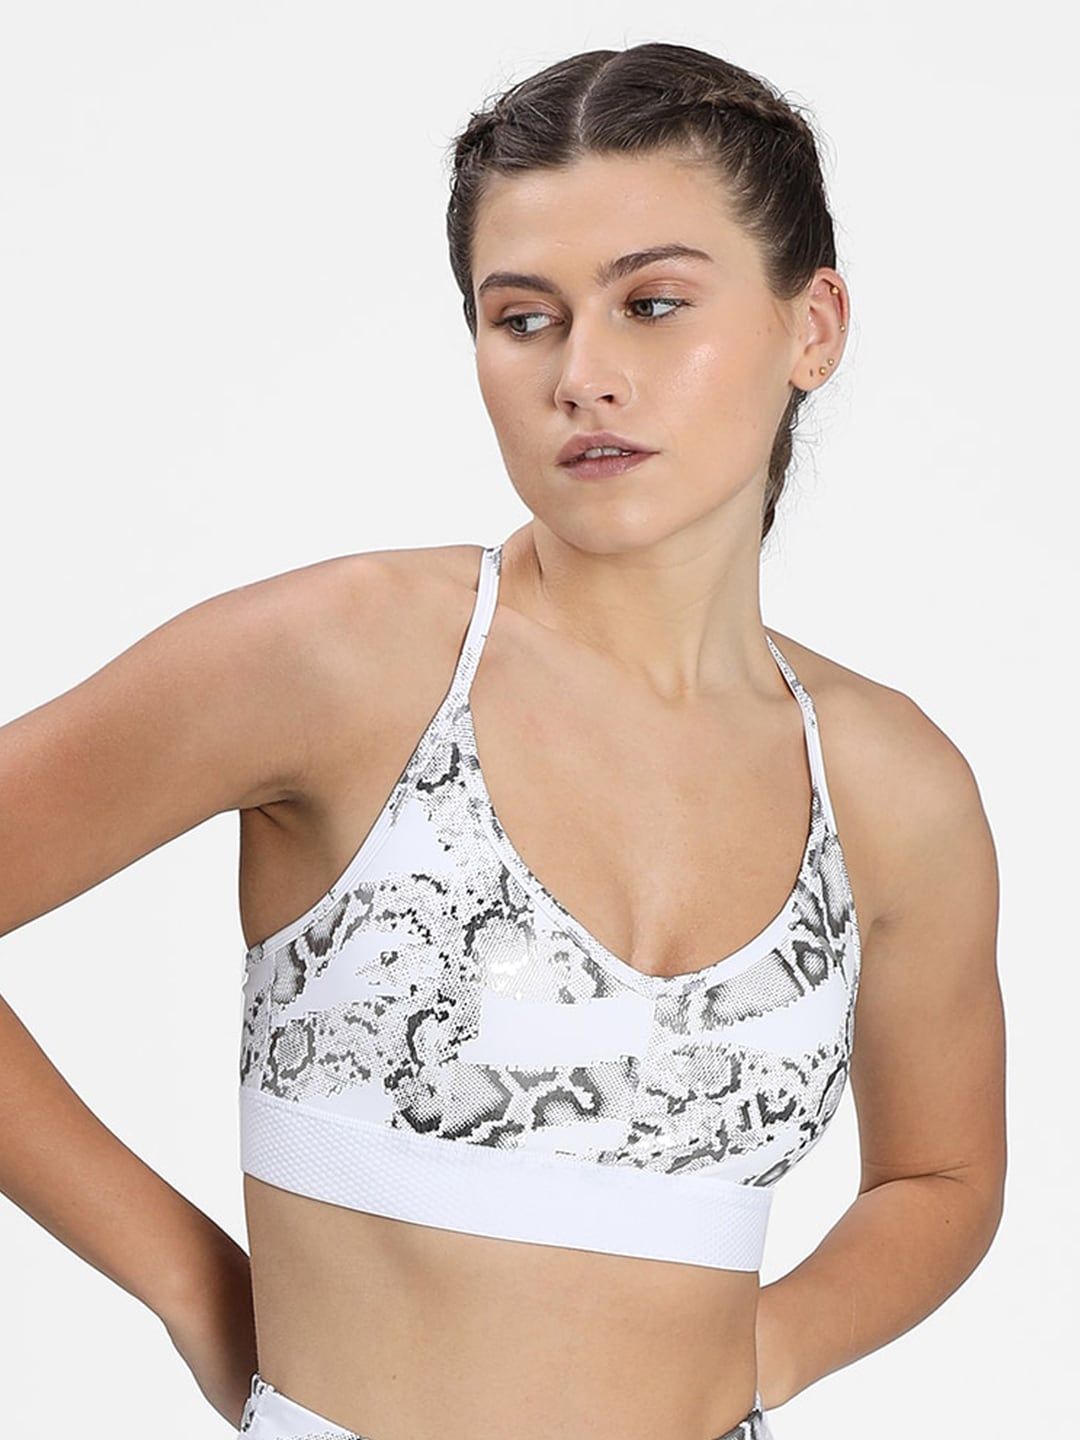 Puma White & Black Printed Non-Wired Lightly Padded Push-Up Bra 52024402 Price in India